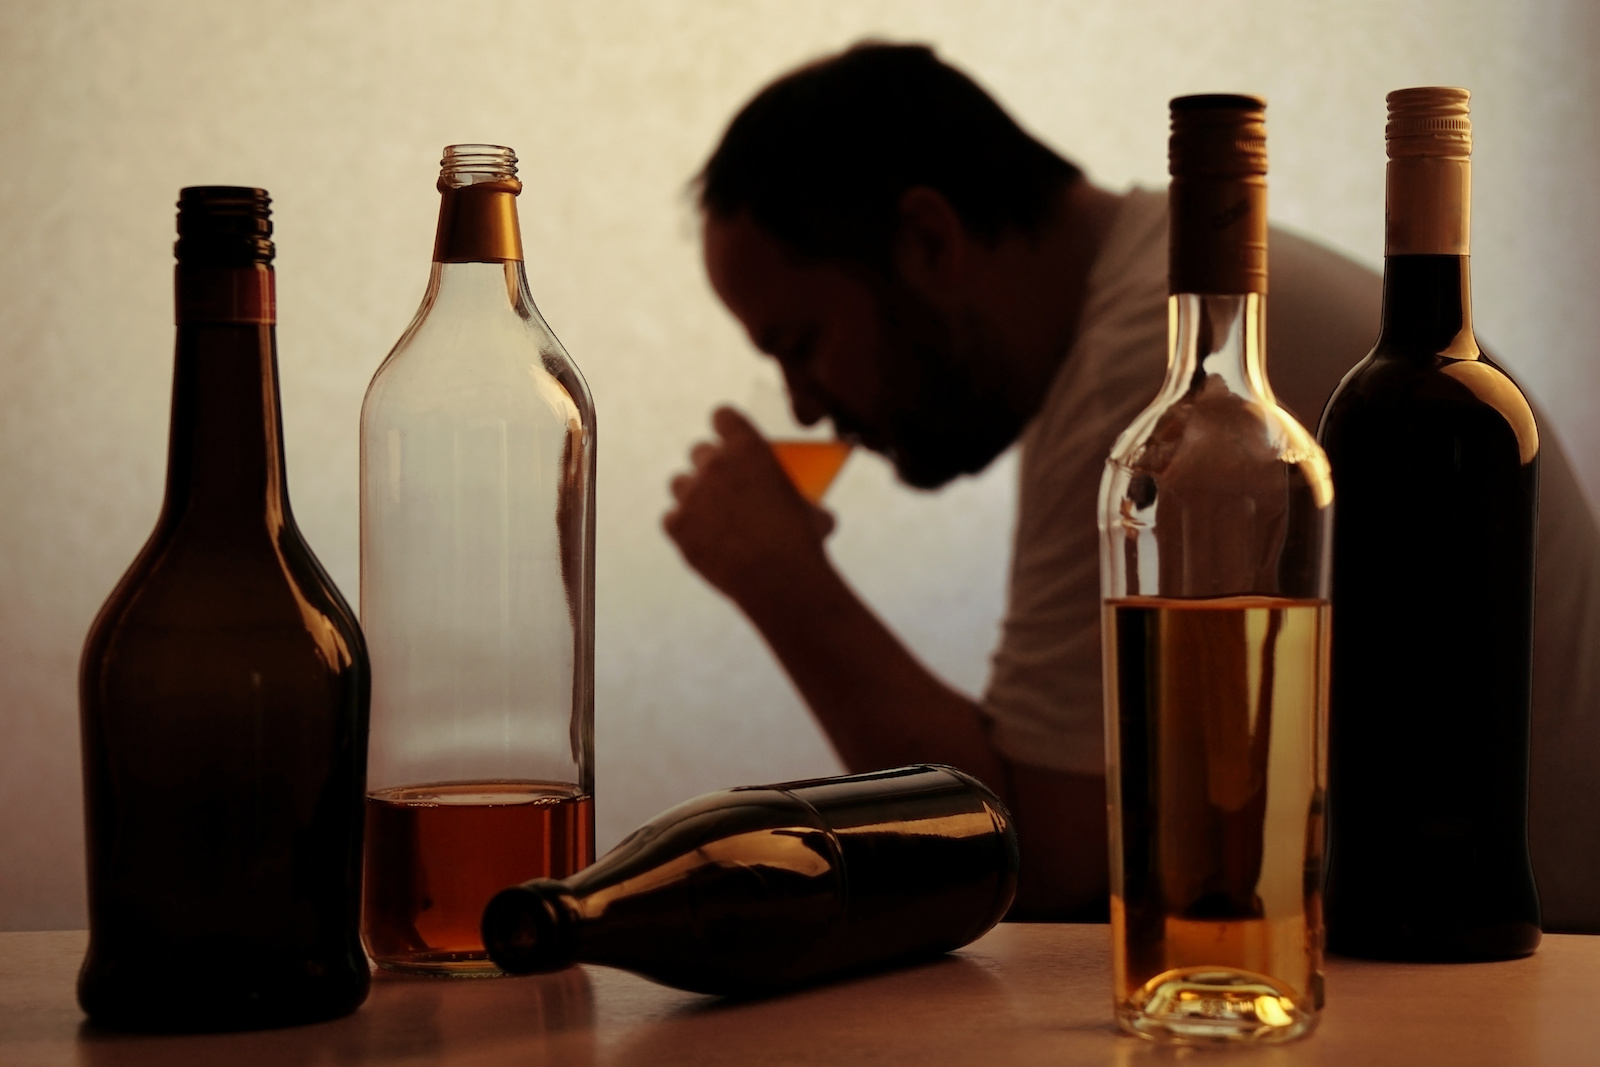 Drinking alcohol: The good, the bad, and the ugly - UT Physicians